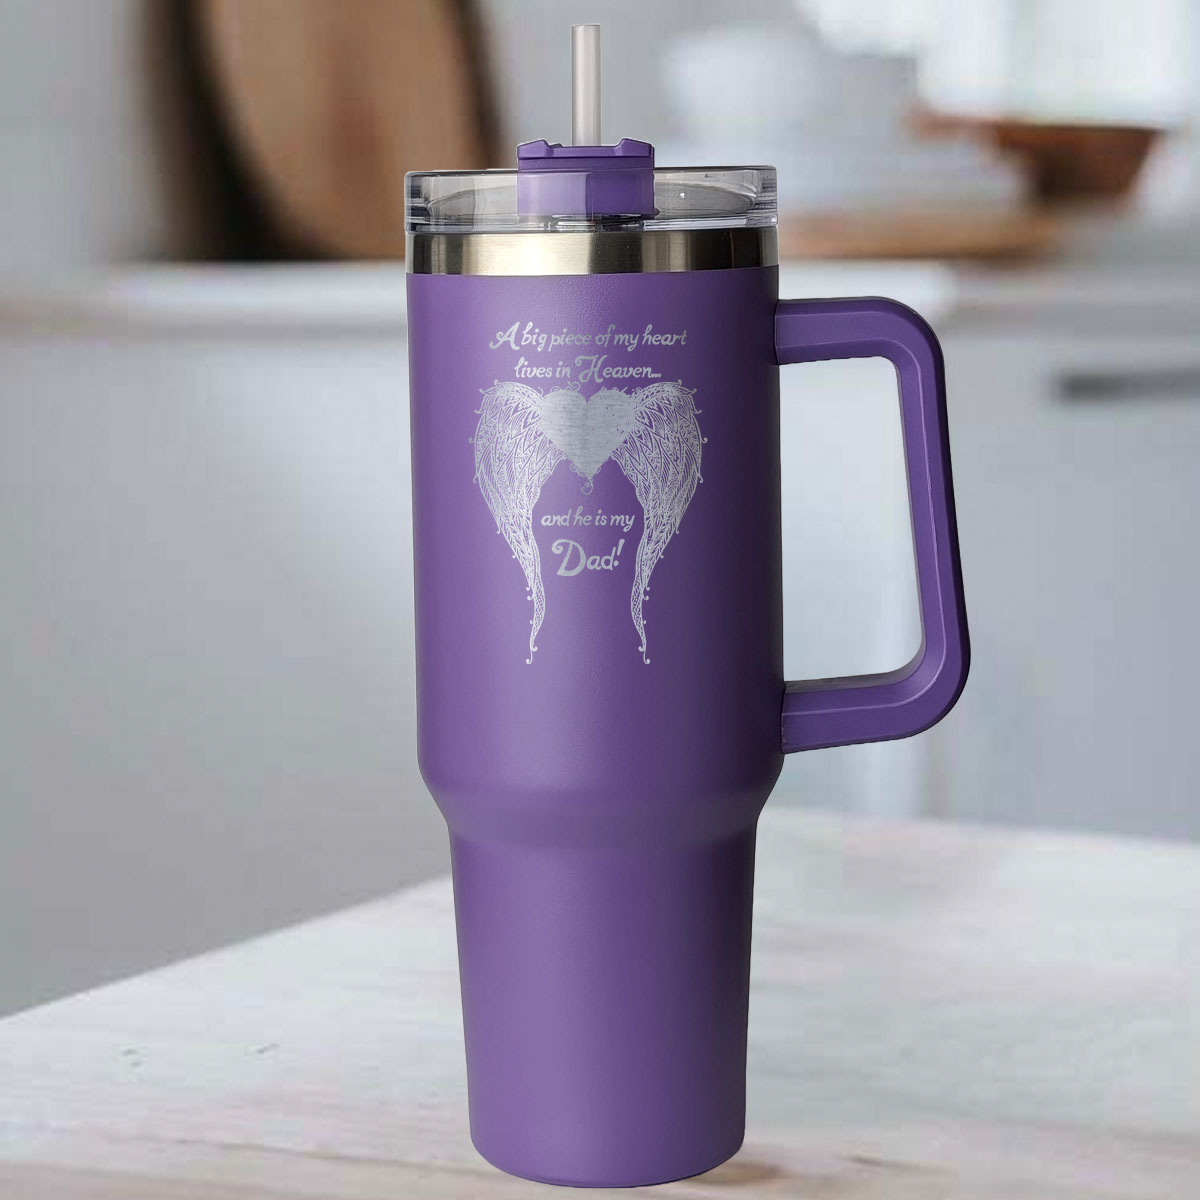 Dad - A Big Piece of my Heart 40 Ounce Laser Etched Tumbler Purple